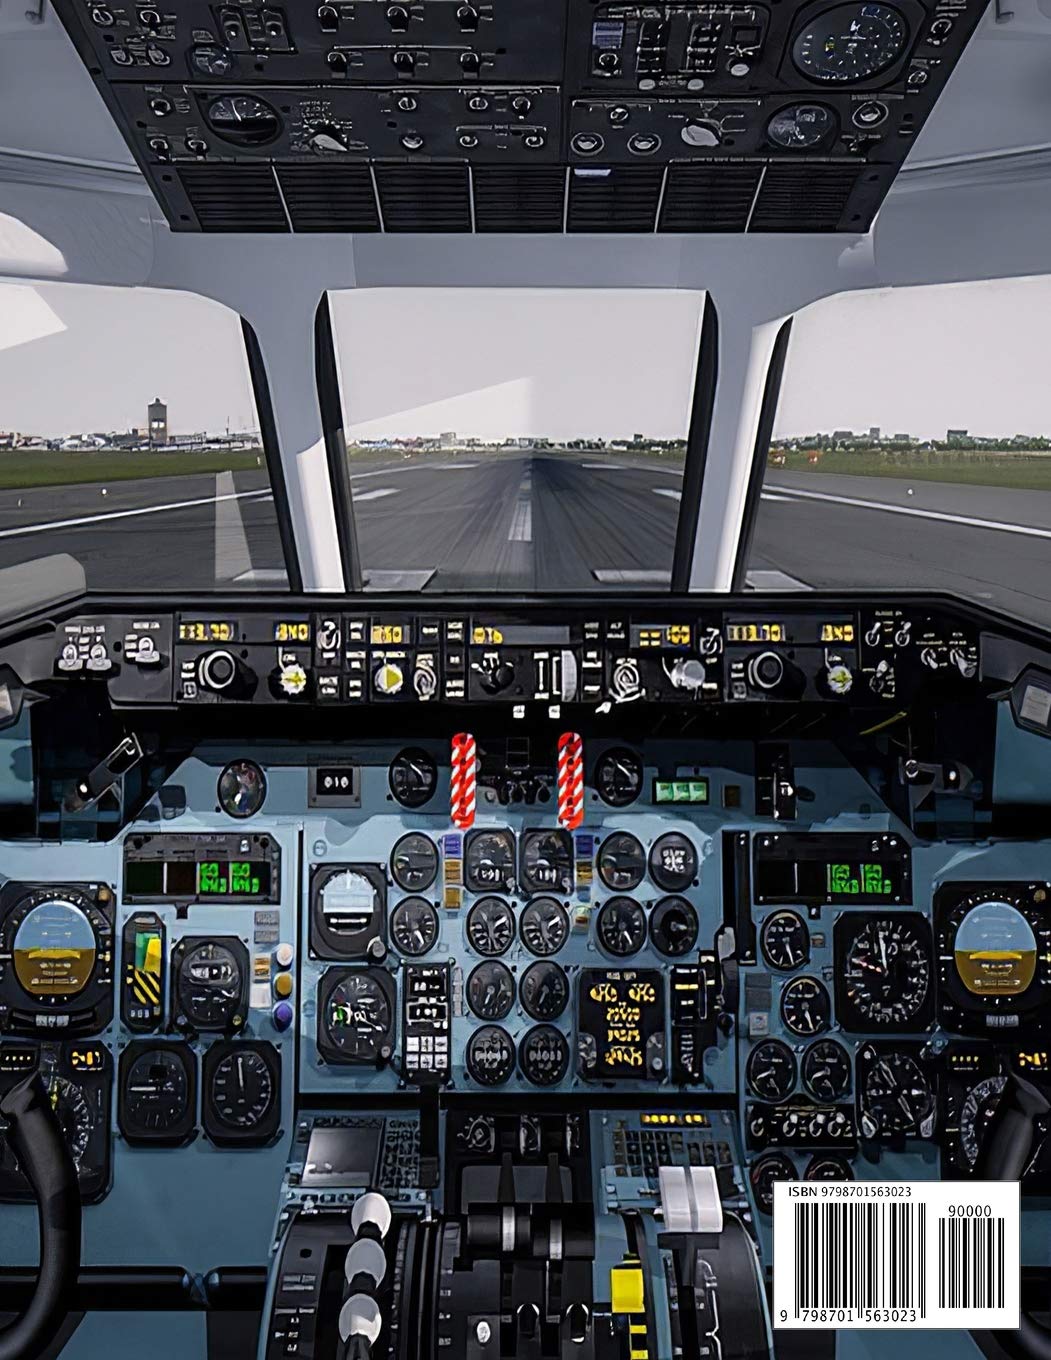 Microsoft Flight Simulator 2020: COMPLETE GUIDE: Best Tips, Tricks, Walkthroughs and Strategies to Become a Pro Player